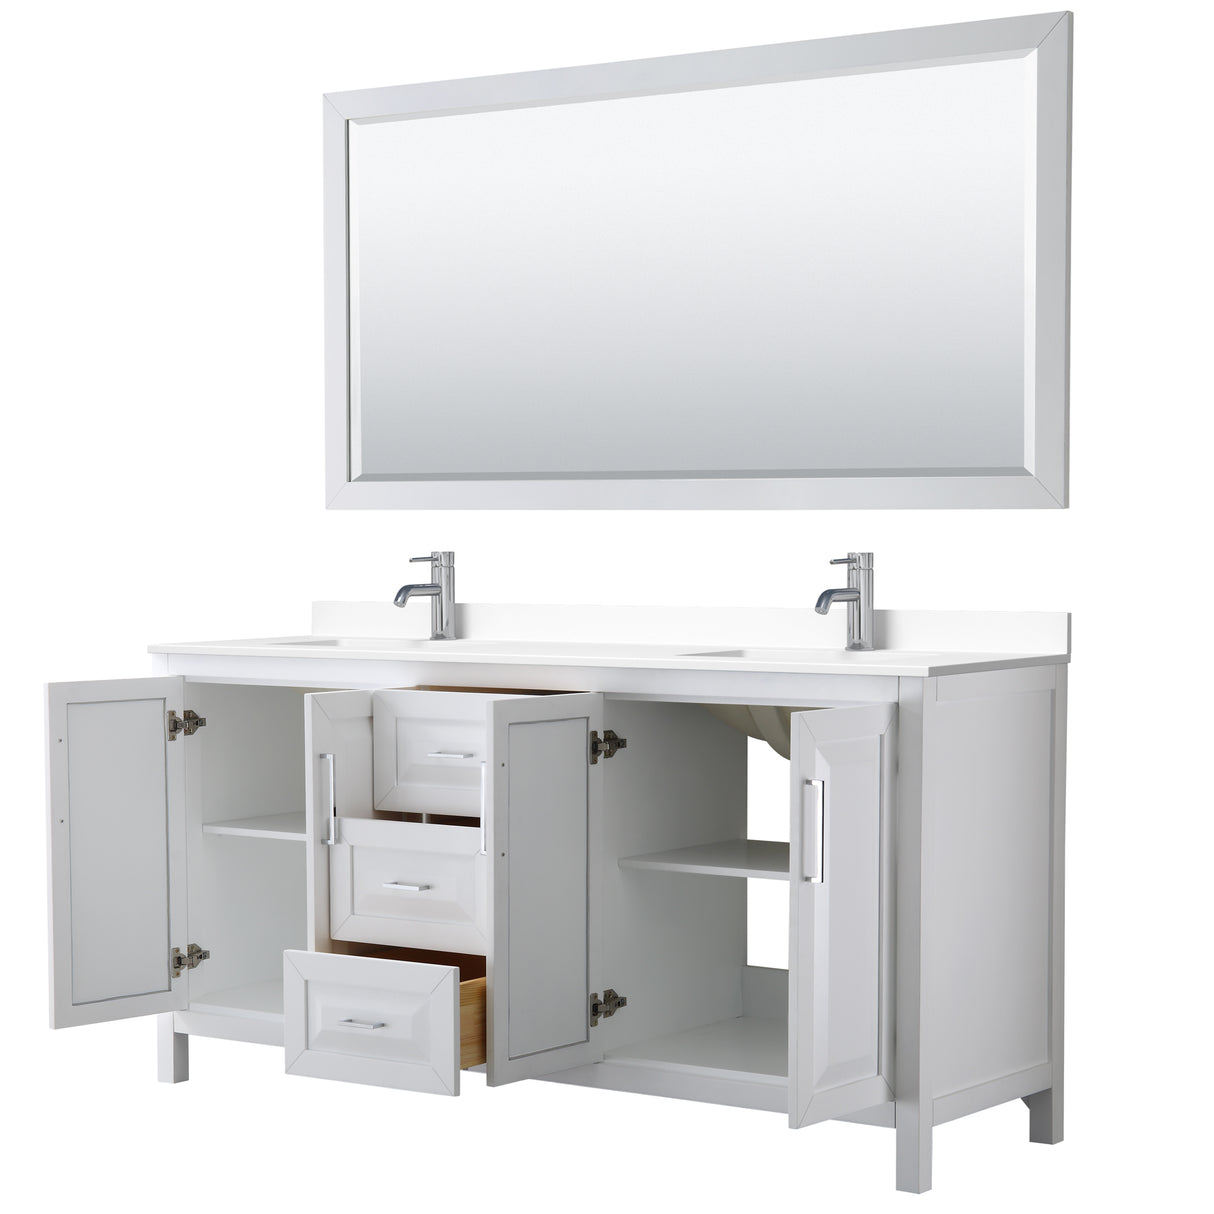 Daria 72 Inch Double Bathroom Vanity in White White Cultured Marble Countertop Undermount Square Sinks 70 Inch Mirror